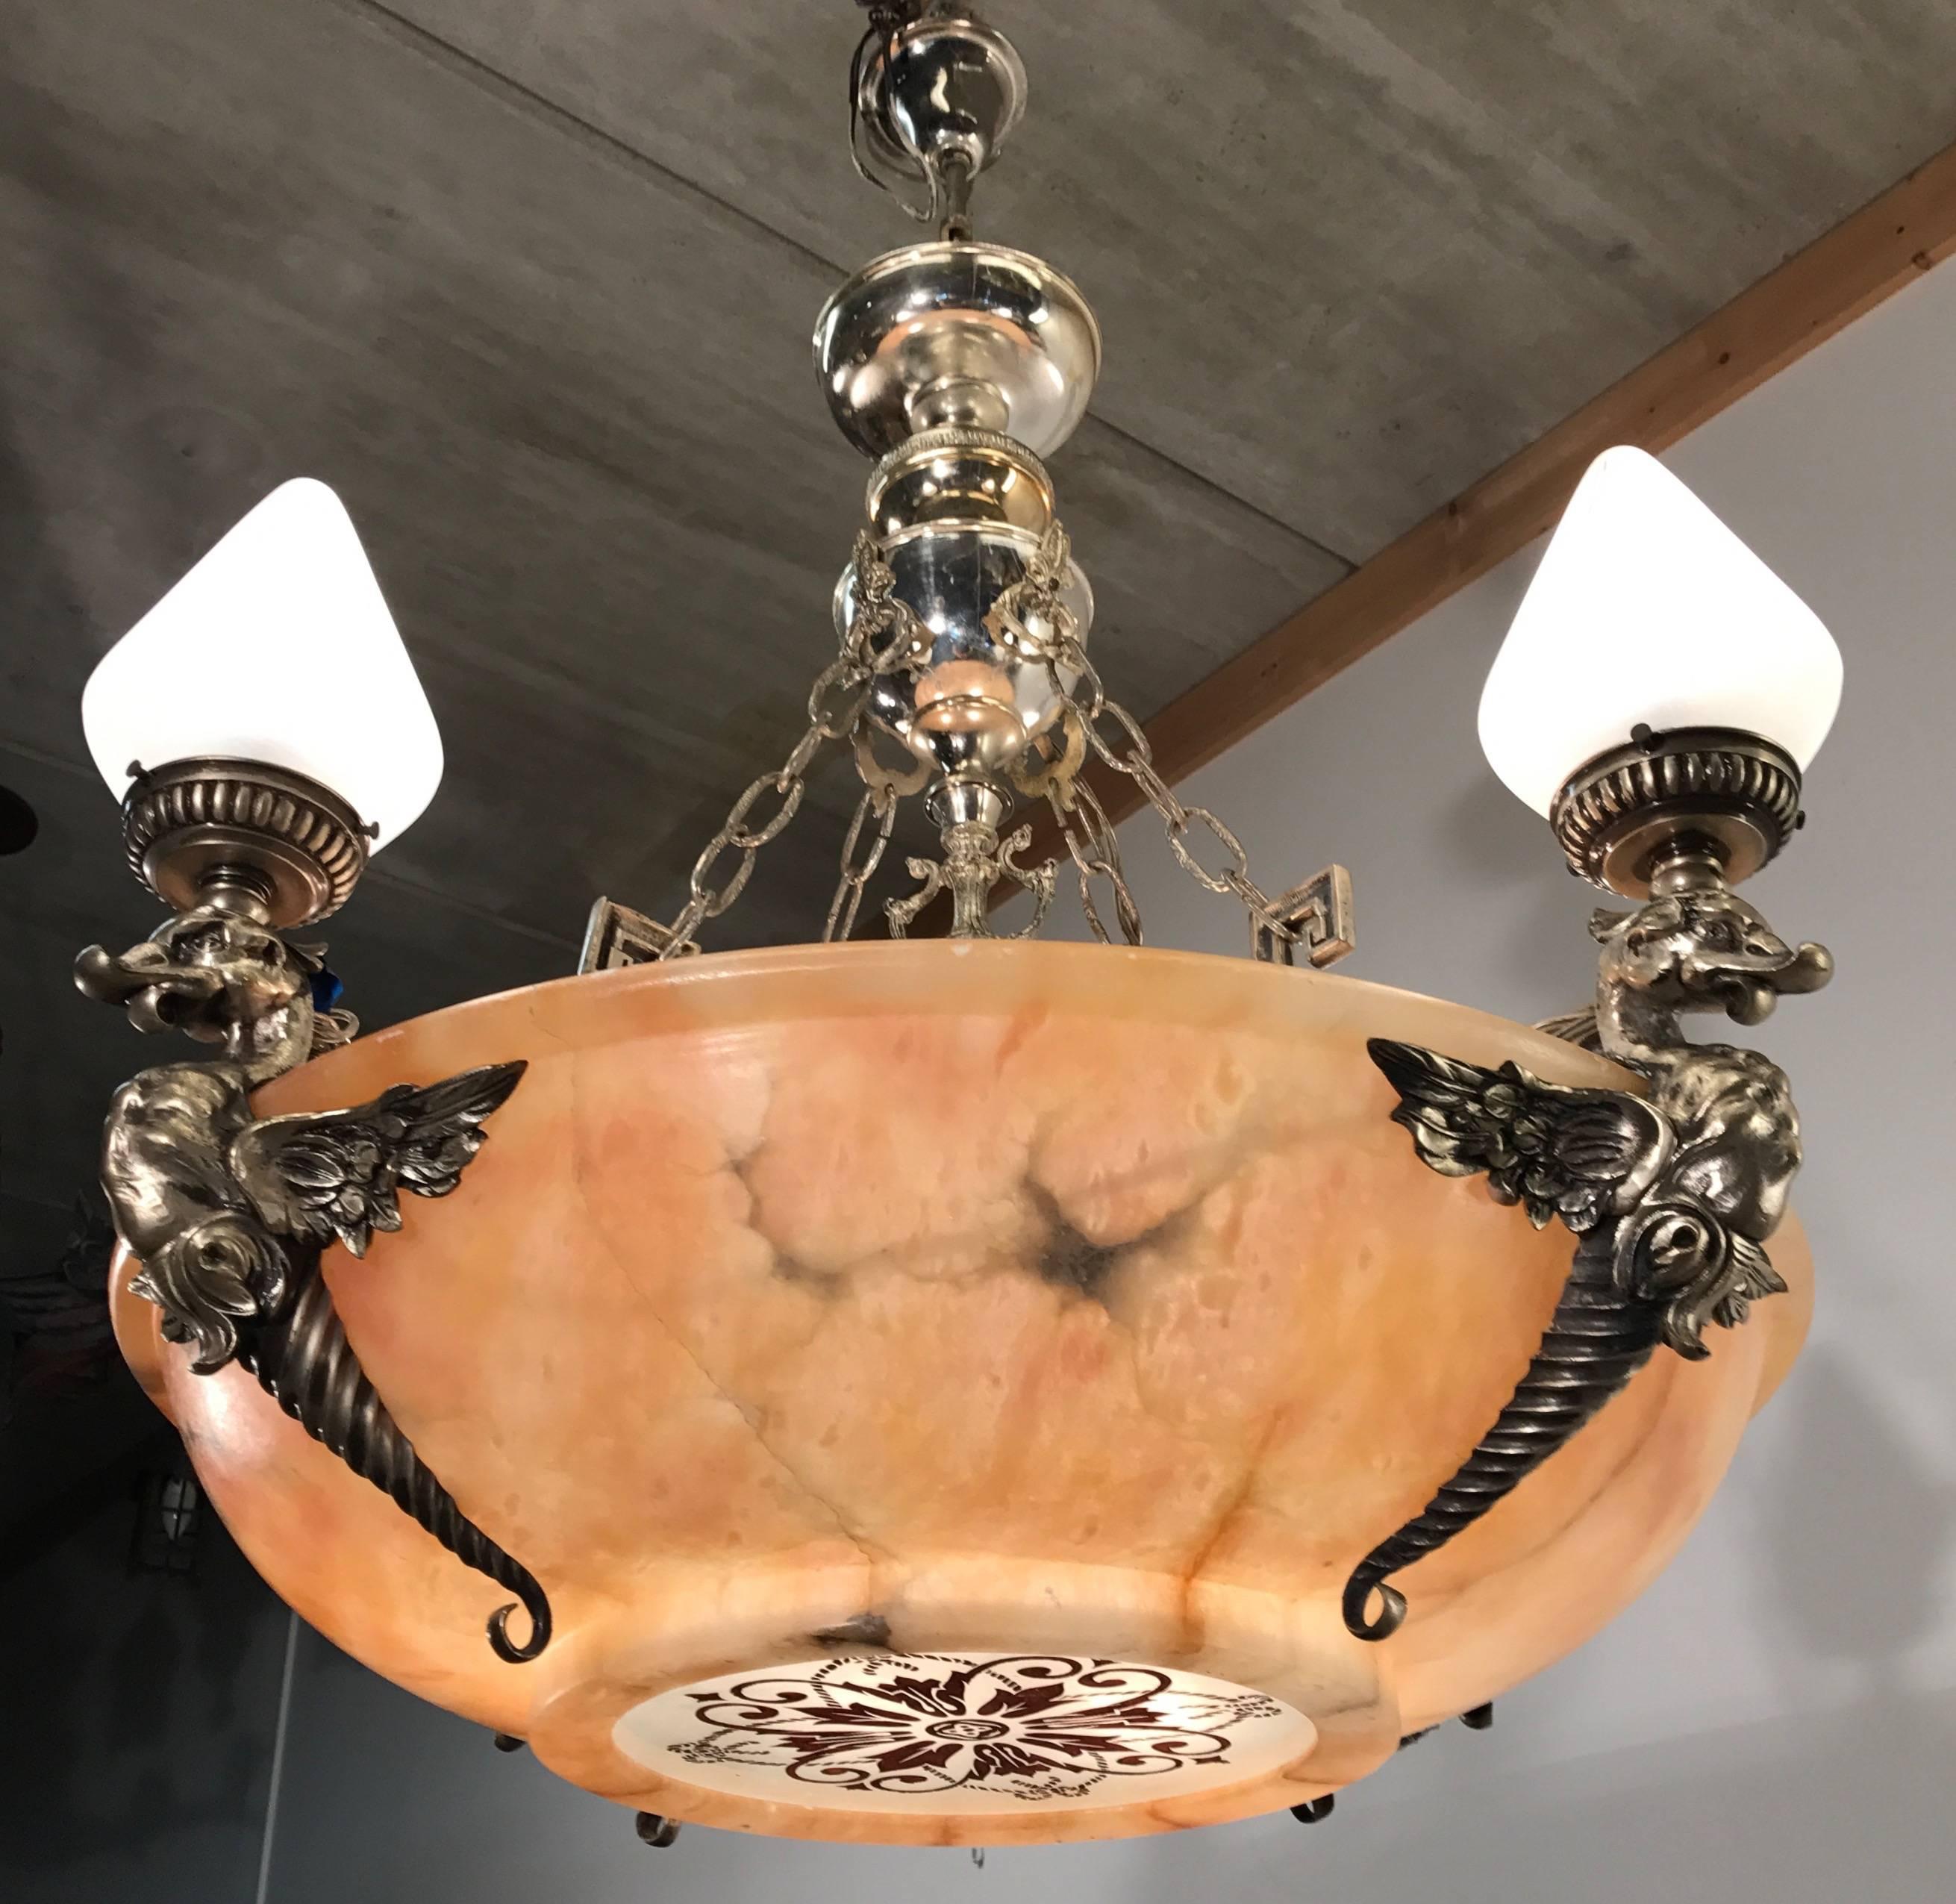 Amazing and impressive 1920s eight light pendant.

This sizeable and great quality, handcrafted pendant has the most beautiful shape and color combinations. The winged mythological animal sculptures on each 'corner' are silvered and a coating